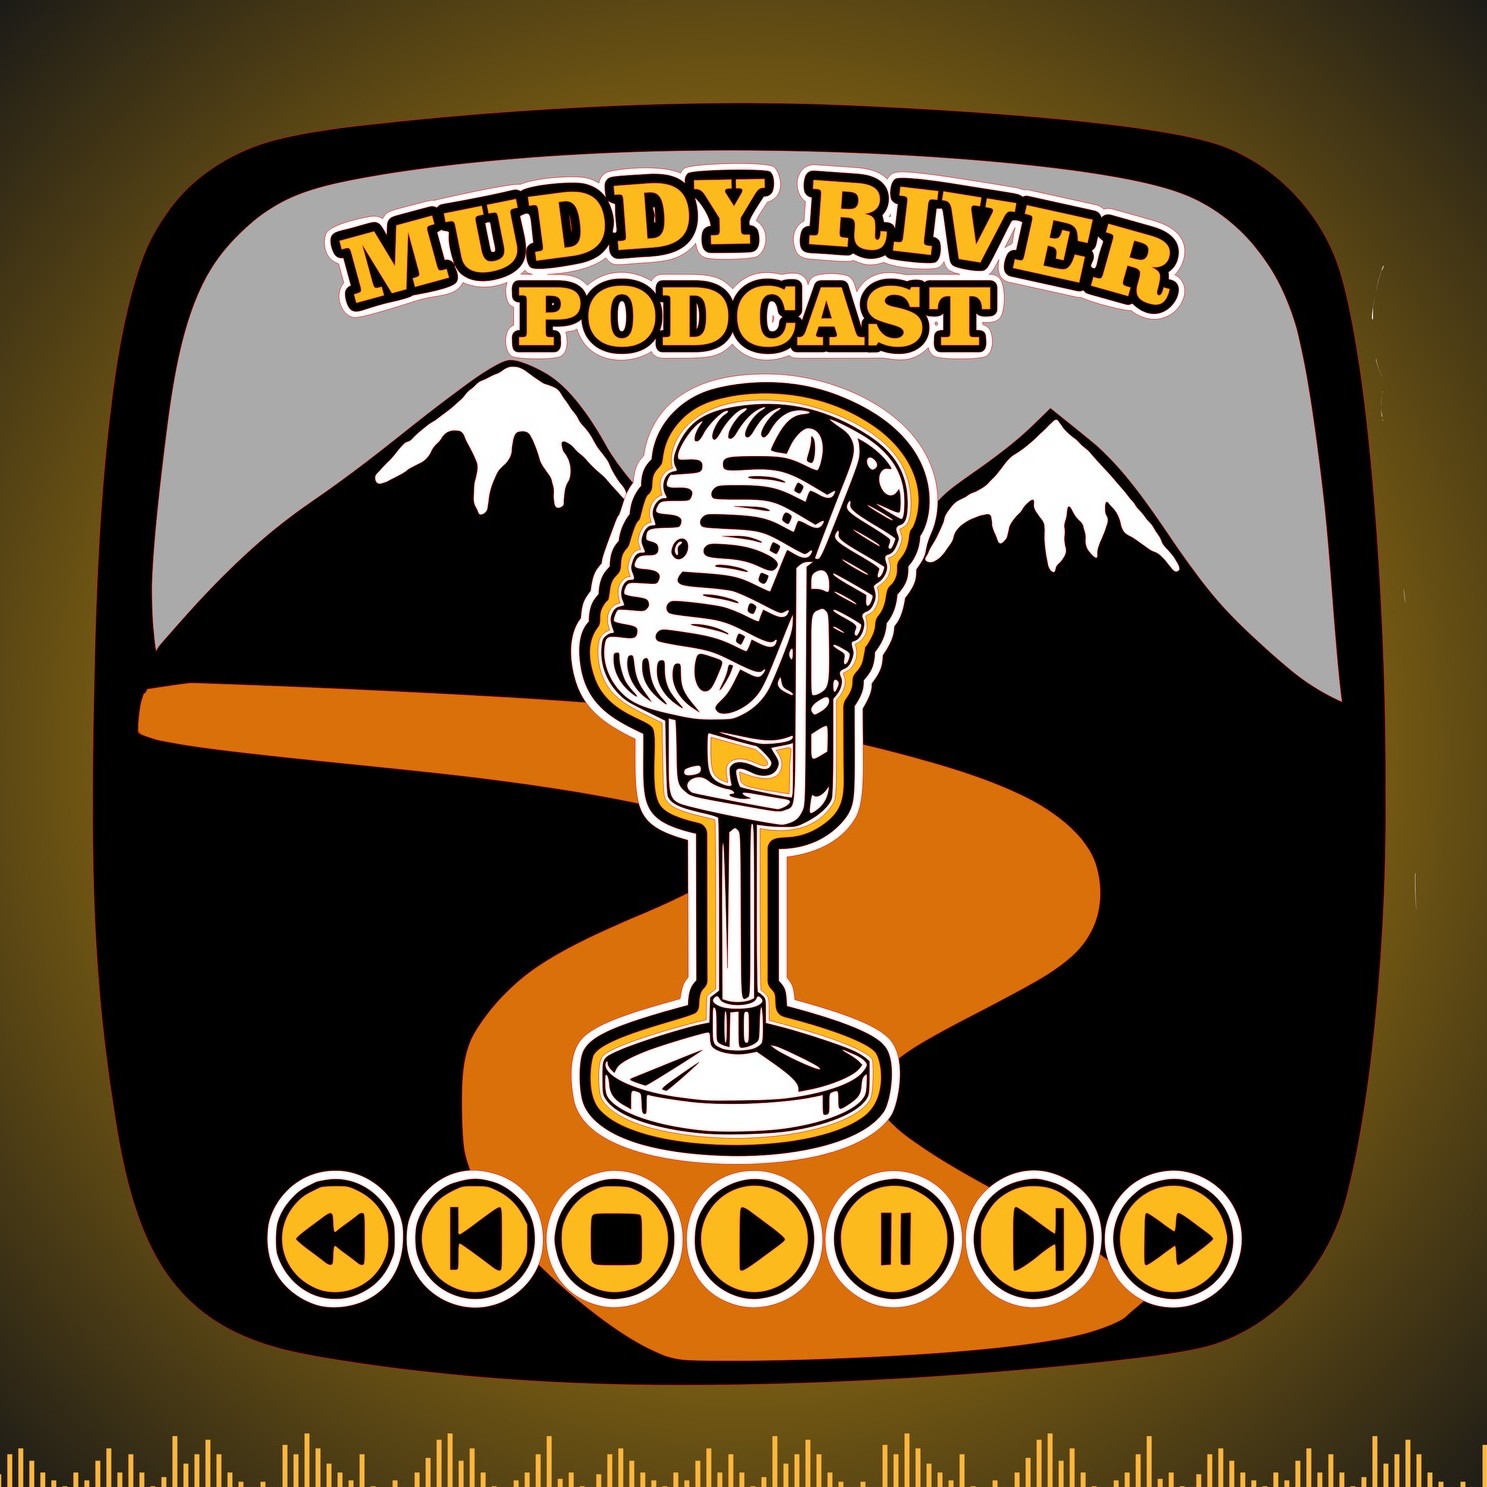 The Muddy River Tactical Podcast